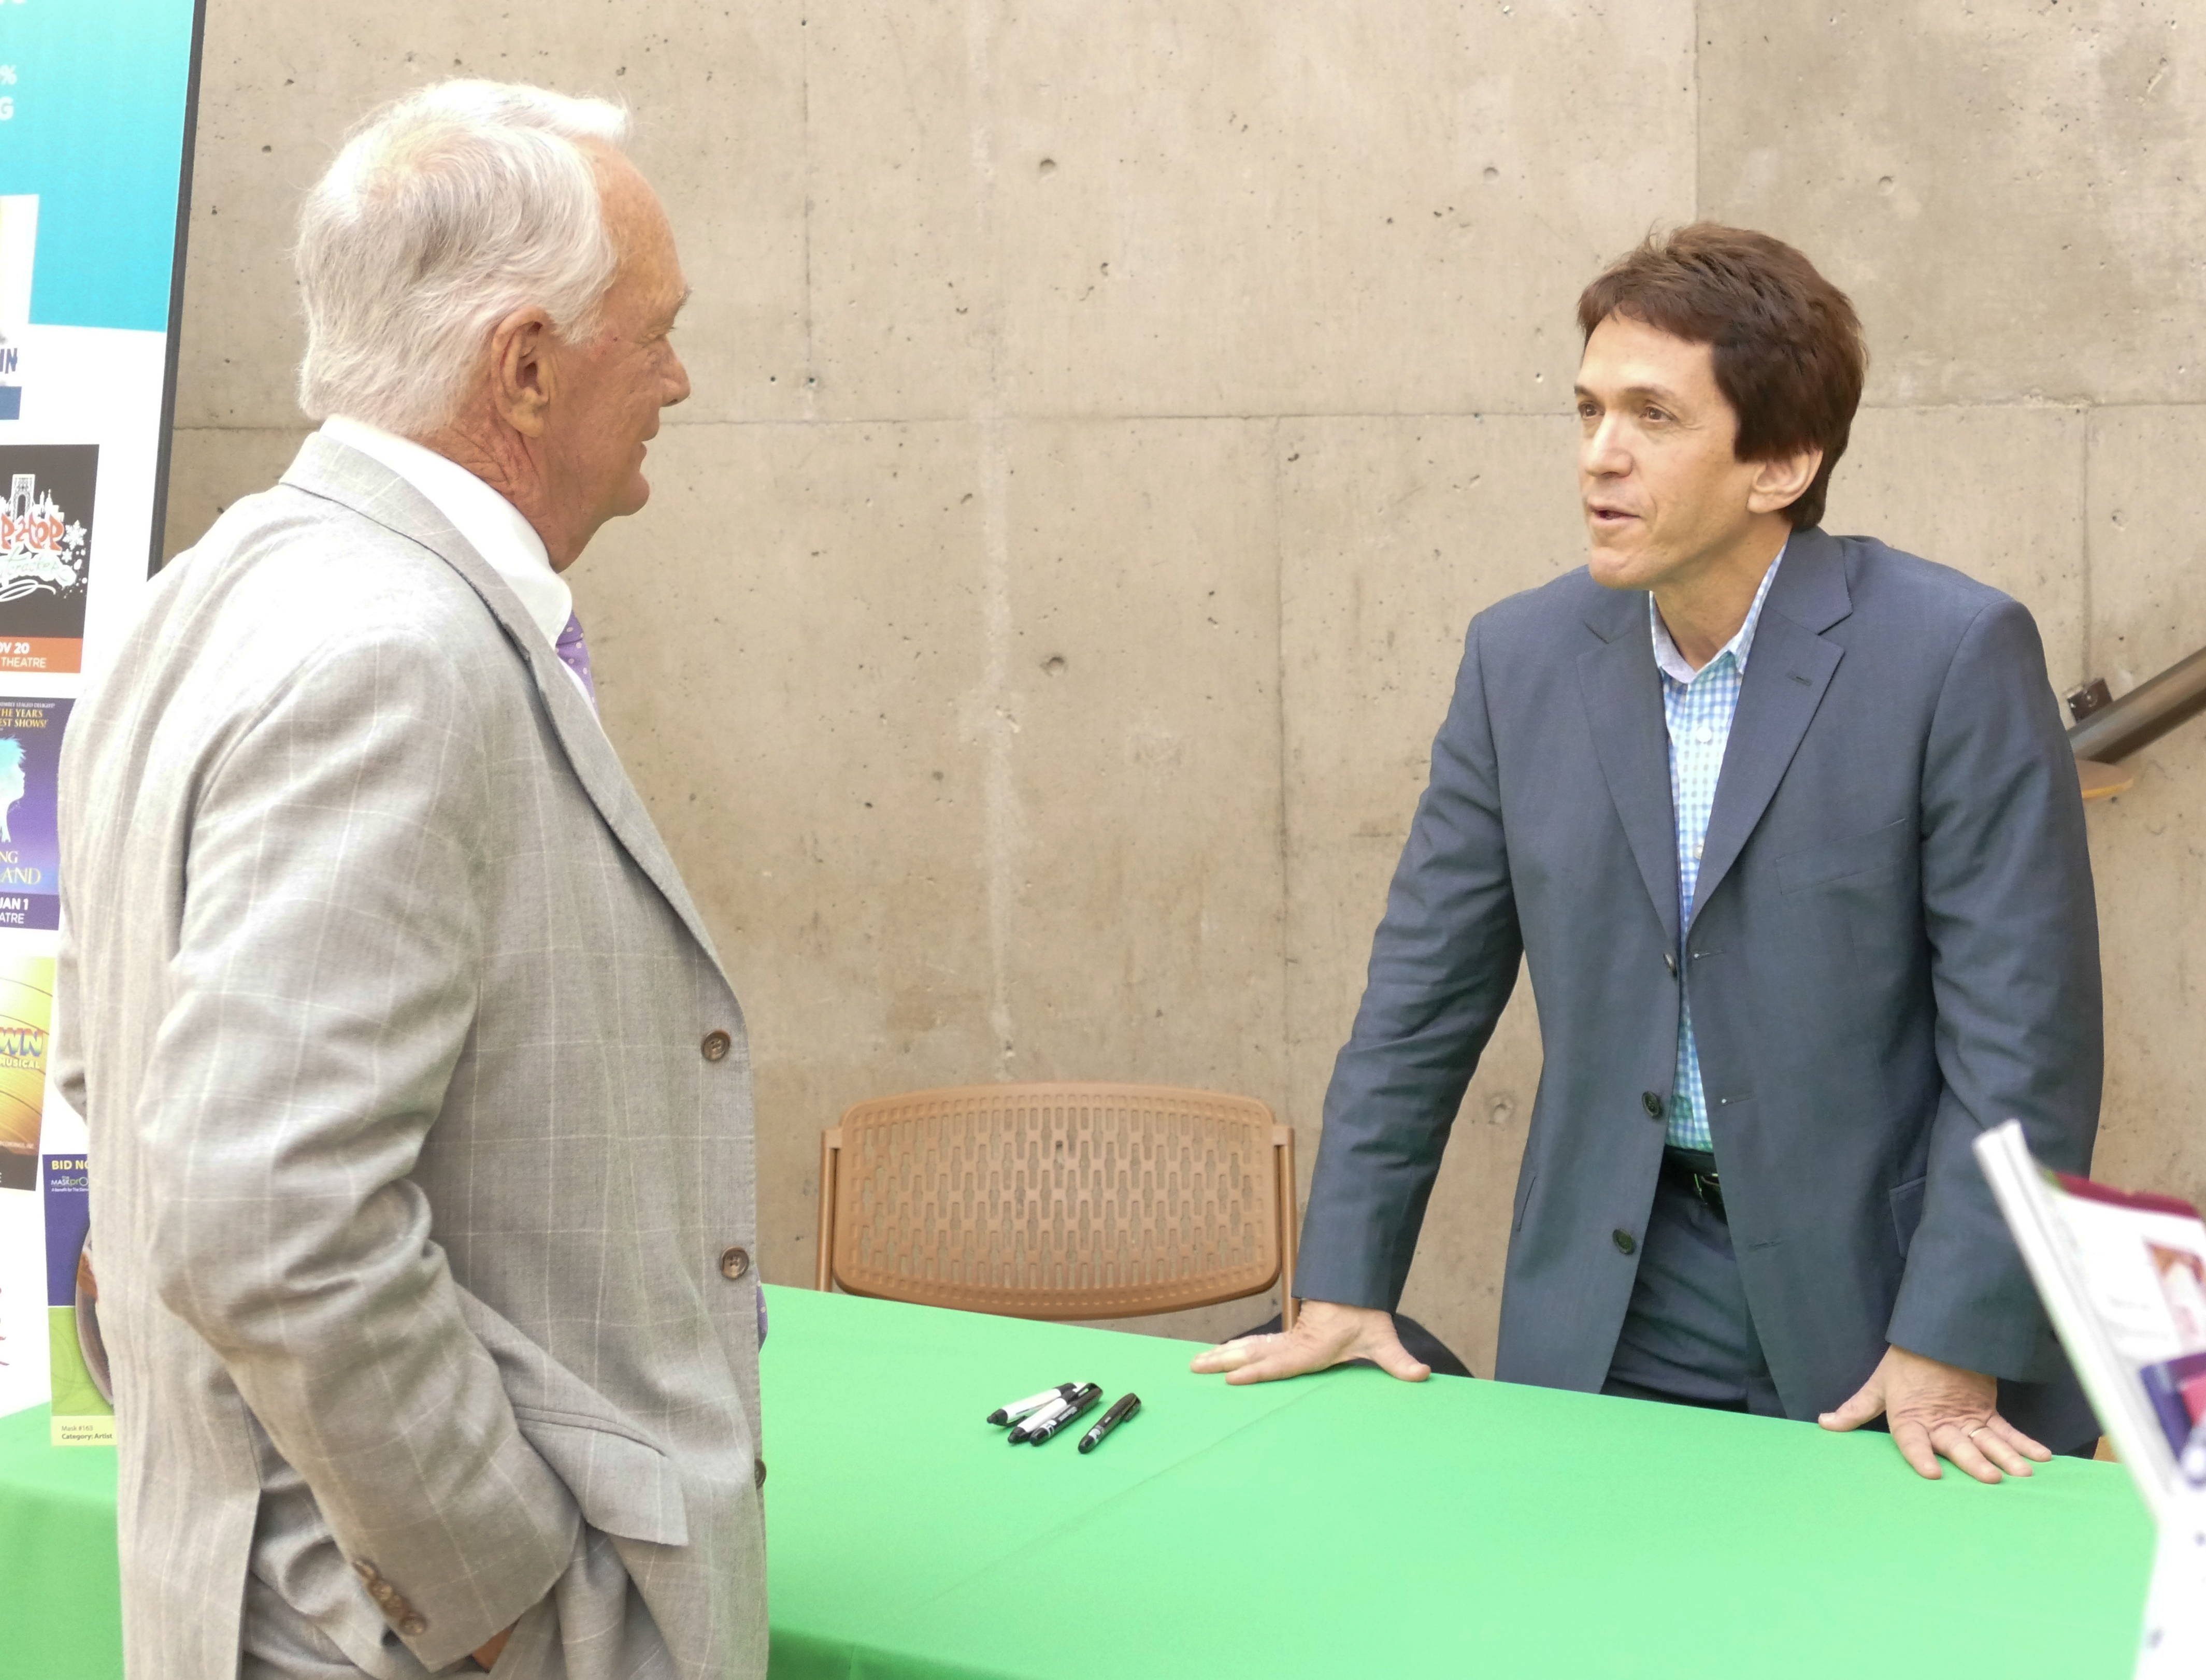 Skip Miller, right, chats with Mitch Albom before his book signing